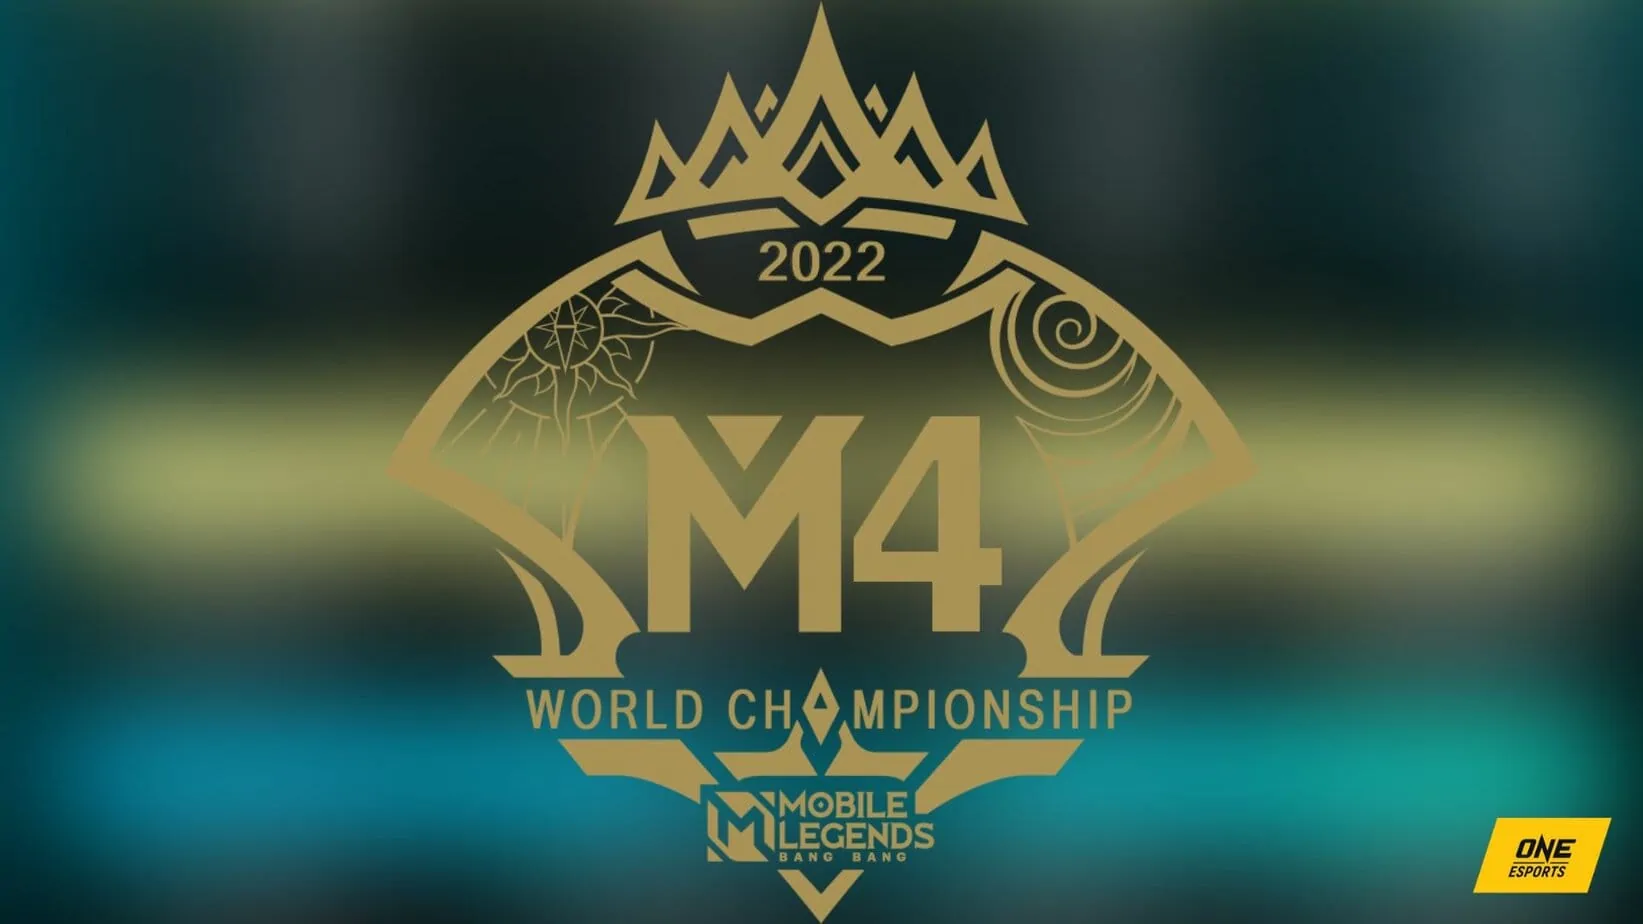 Mobile Legends M4 World Championship will take place in January 2023